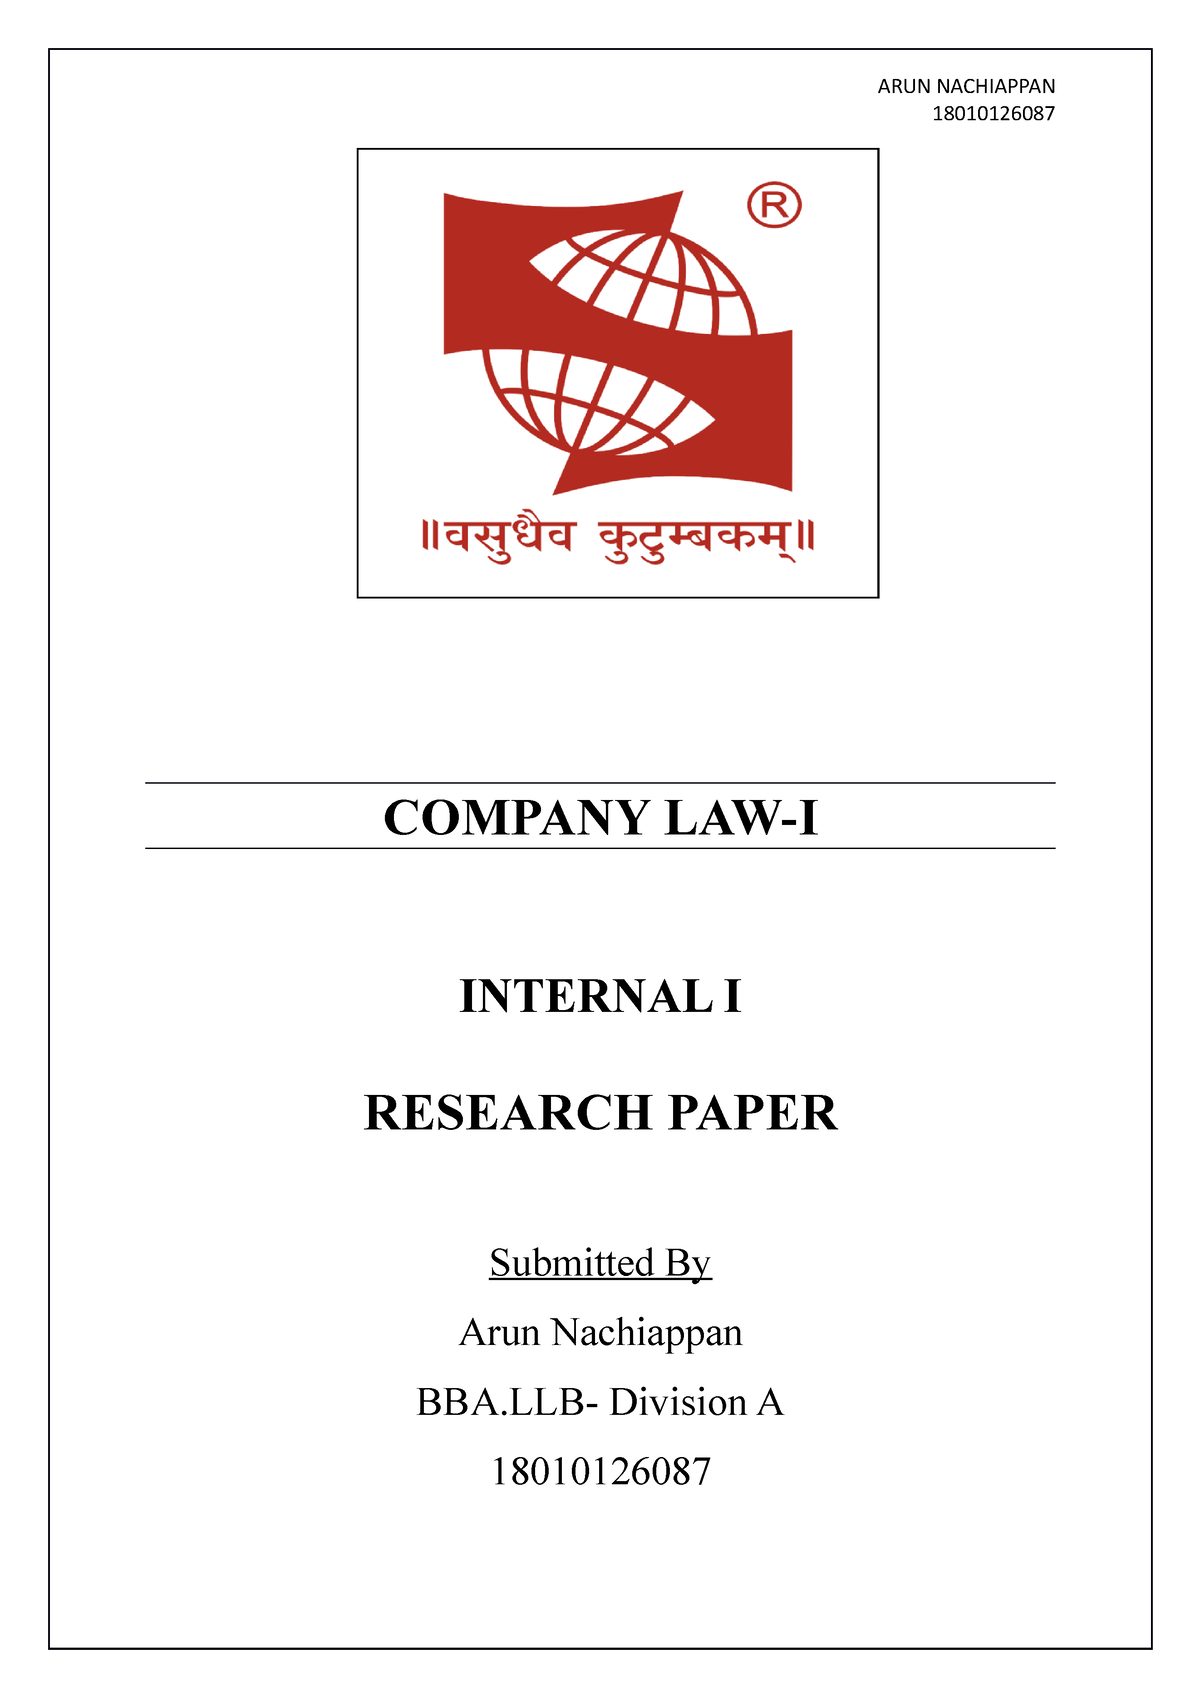 research papers on corporate law